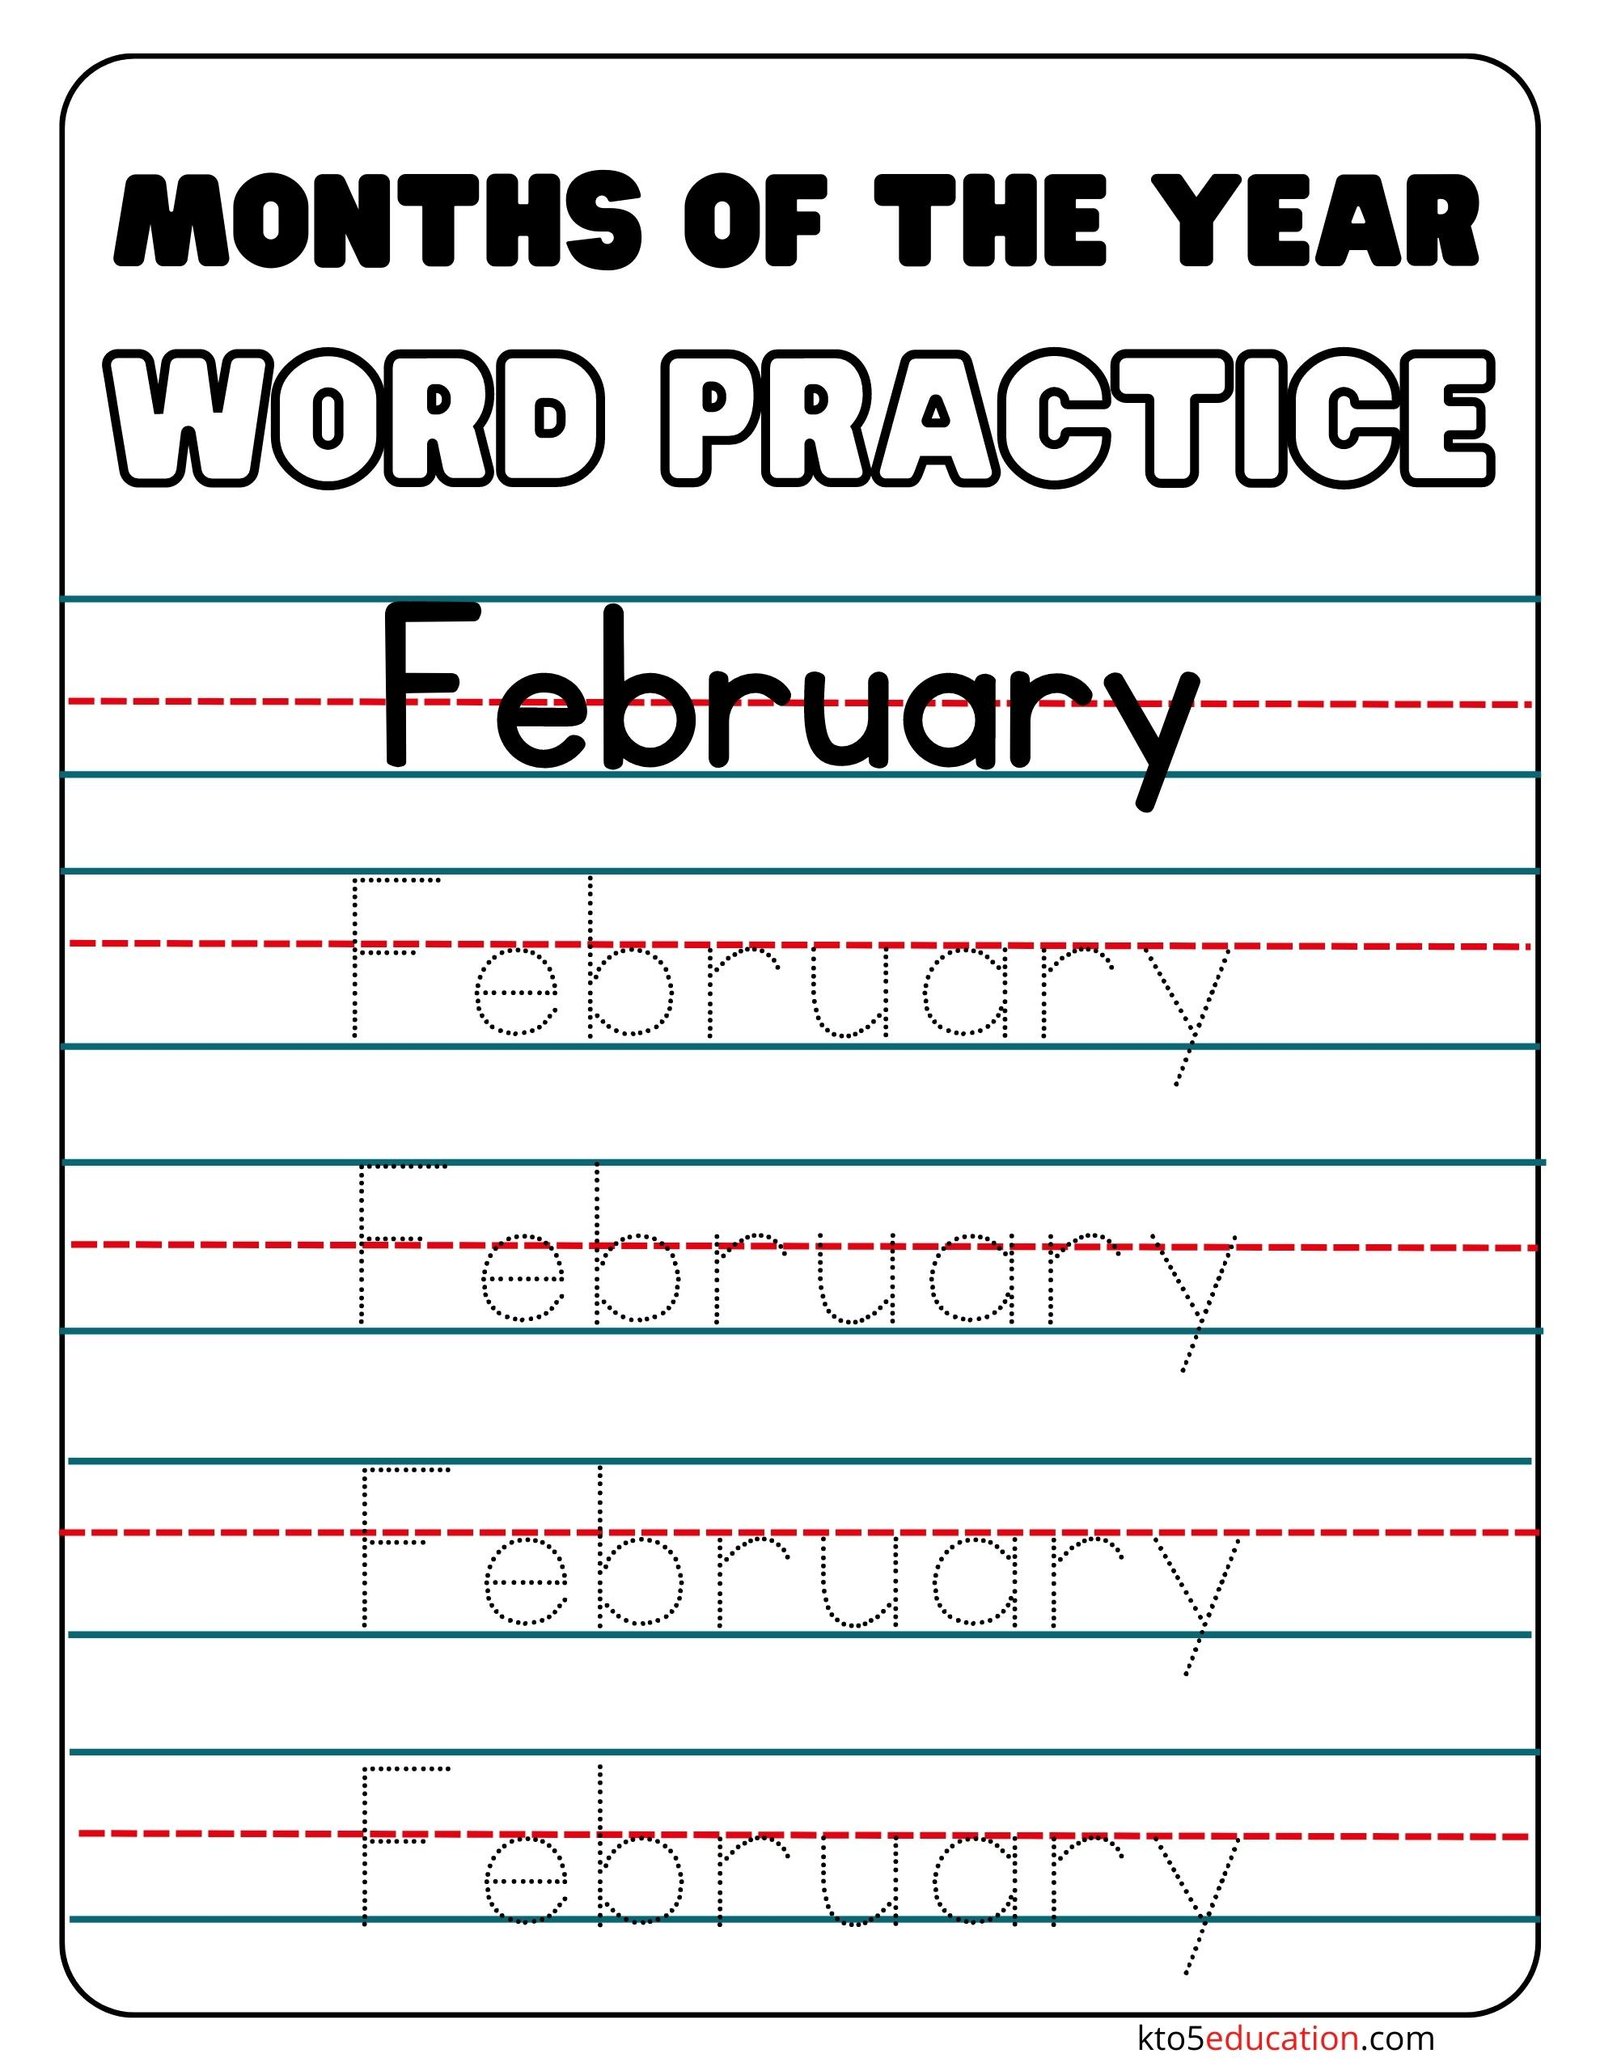 Months Of the year February Word Practice Worksheet